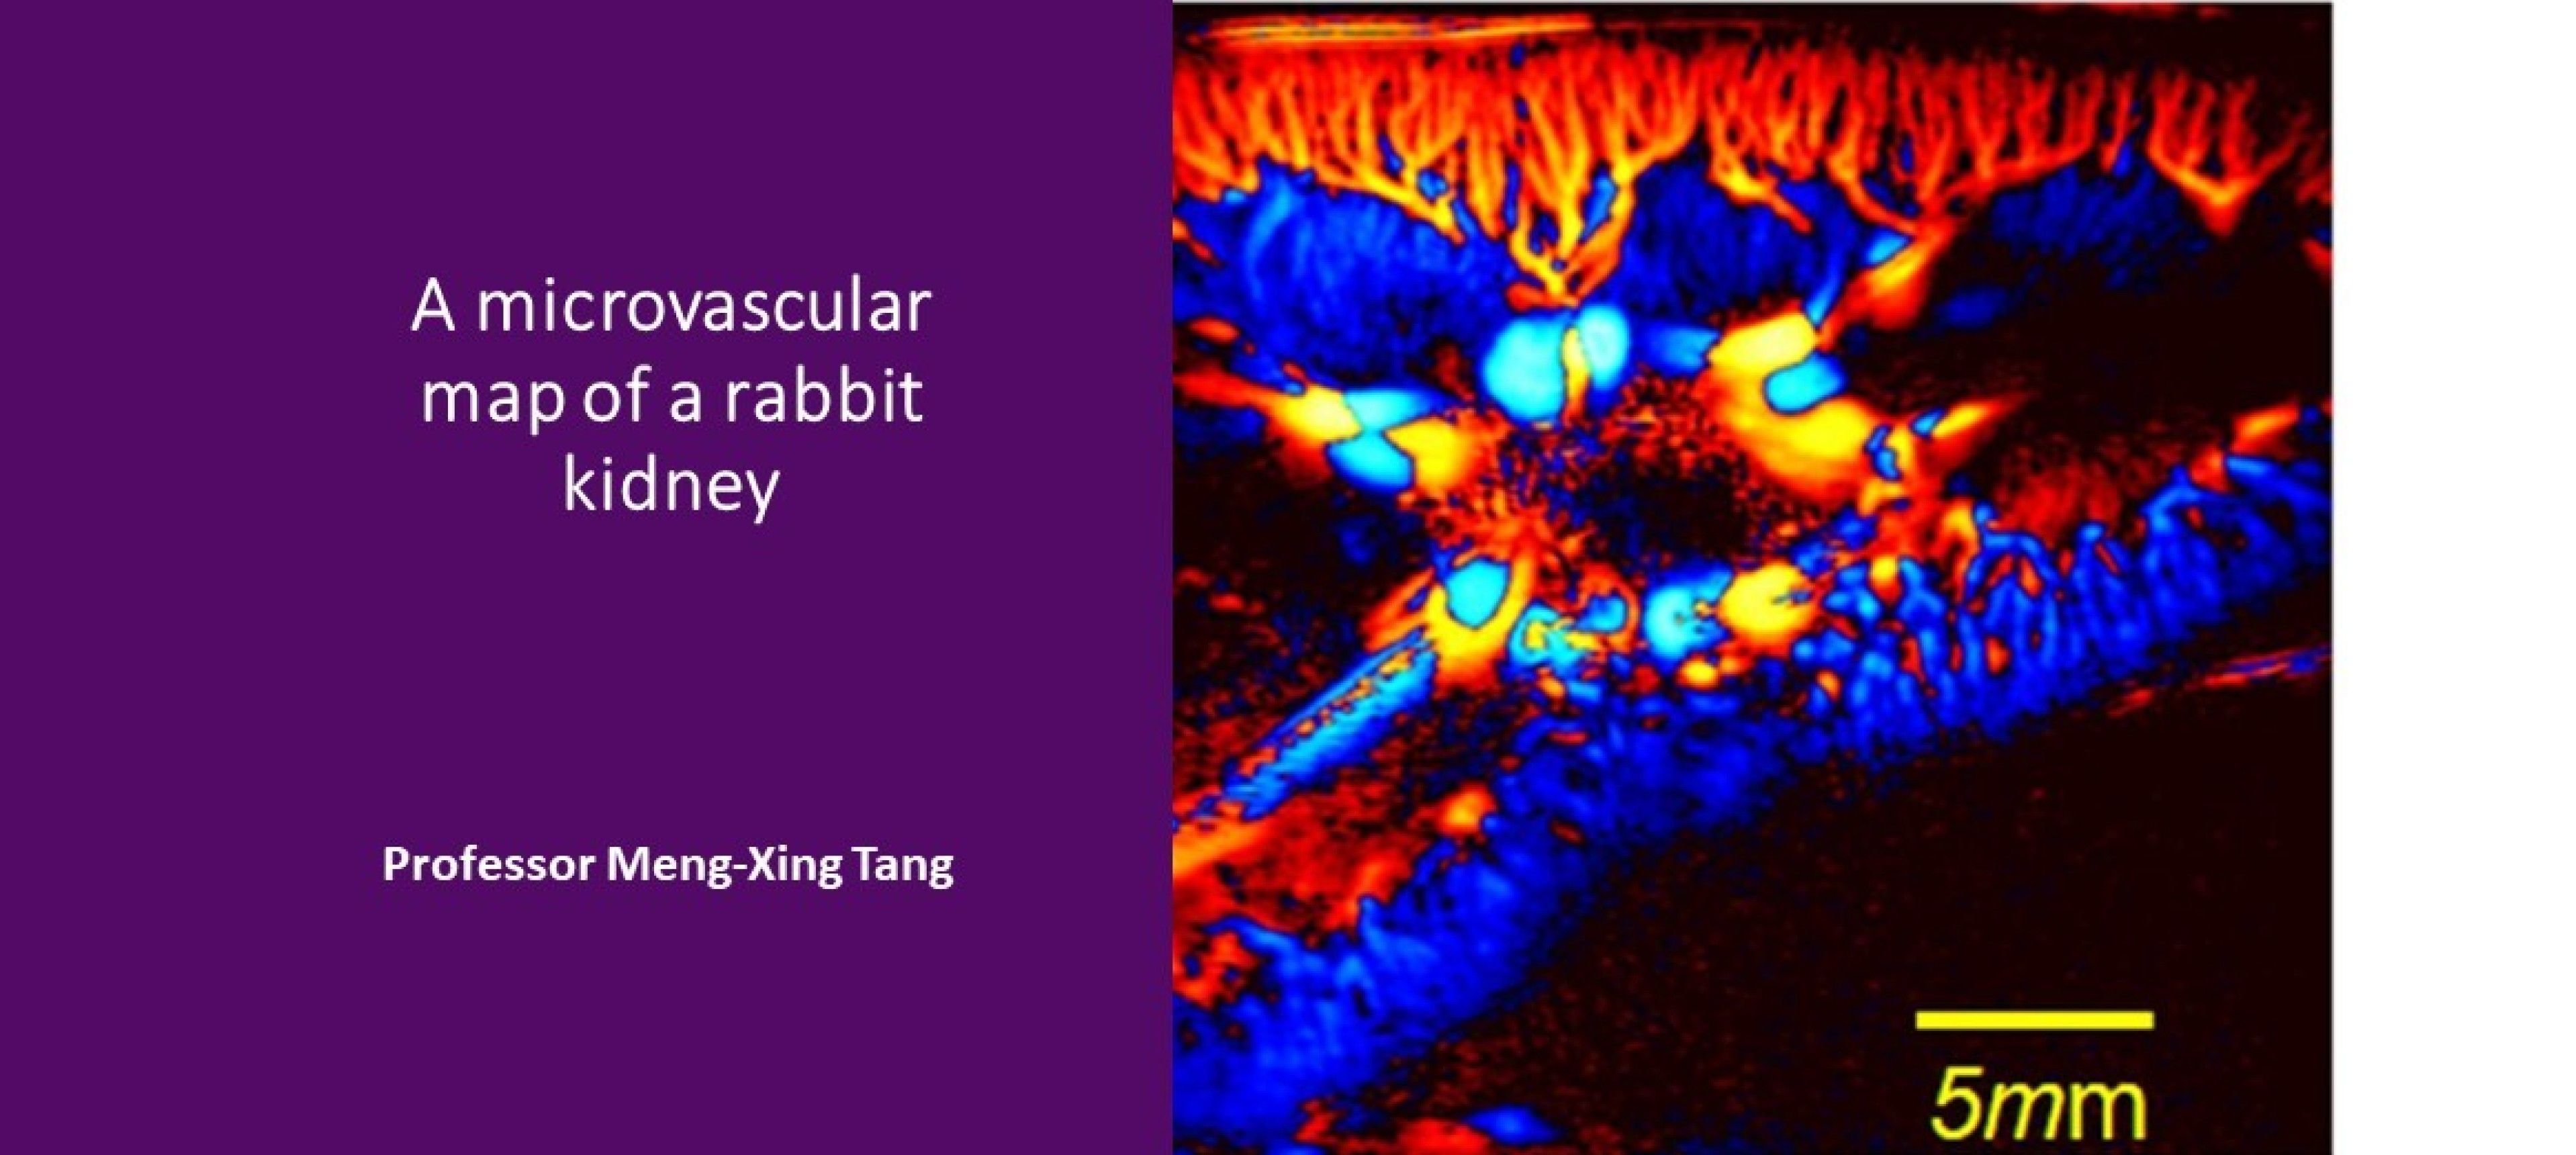 A microvascular map of a rabbit kidney